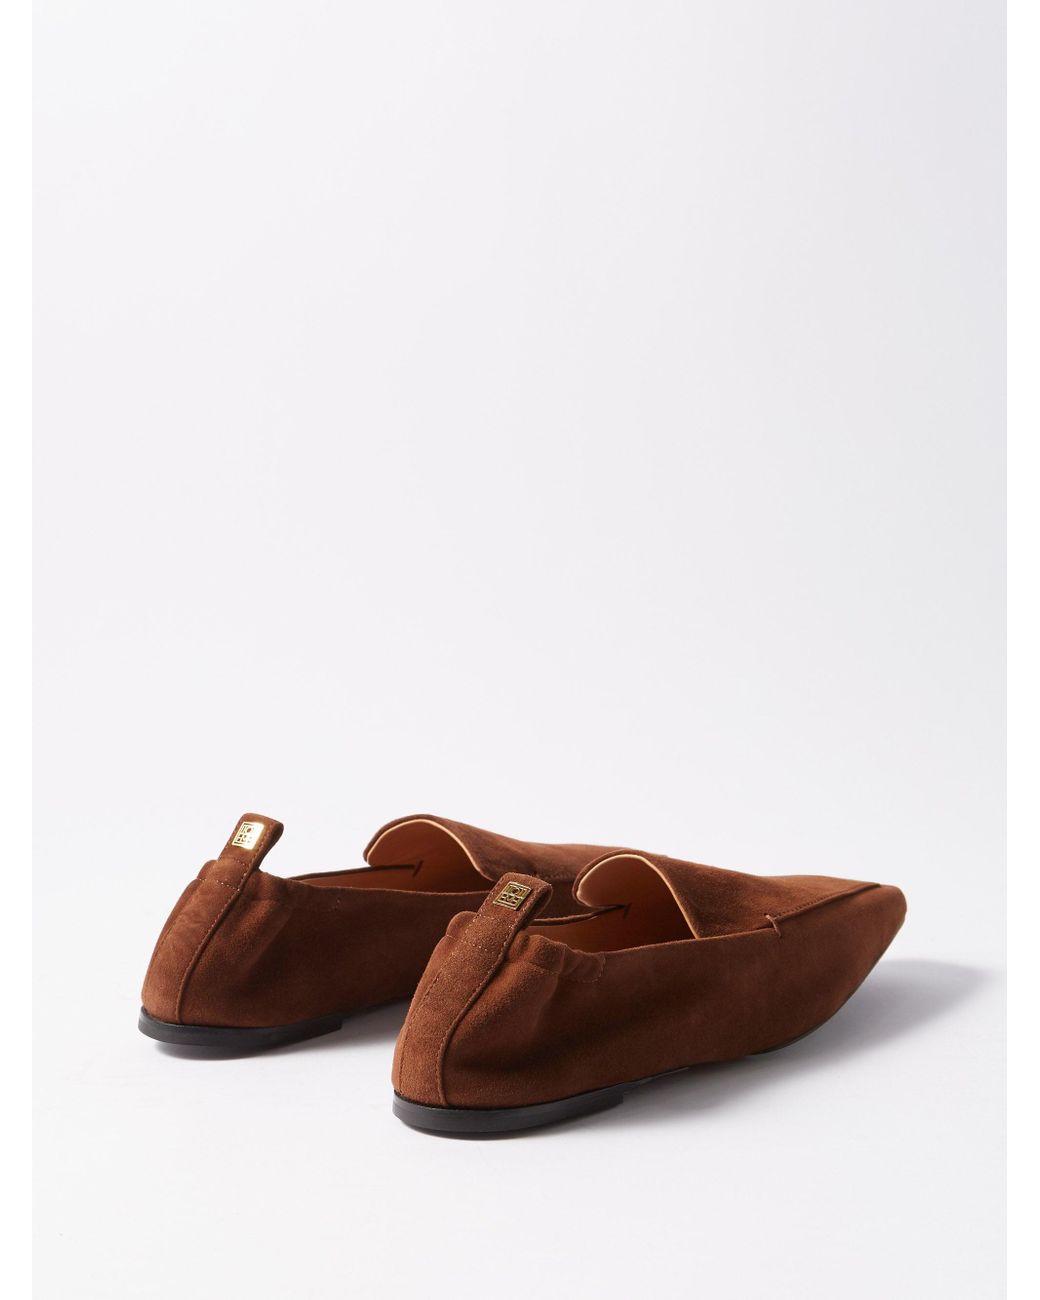 Totême Square-toe Suede Travel Loafers in Chocolate (Brown) | Lyst